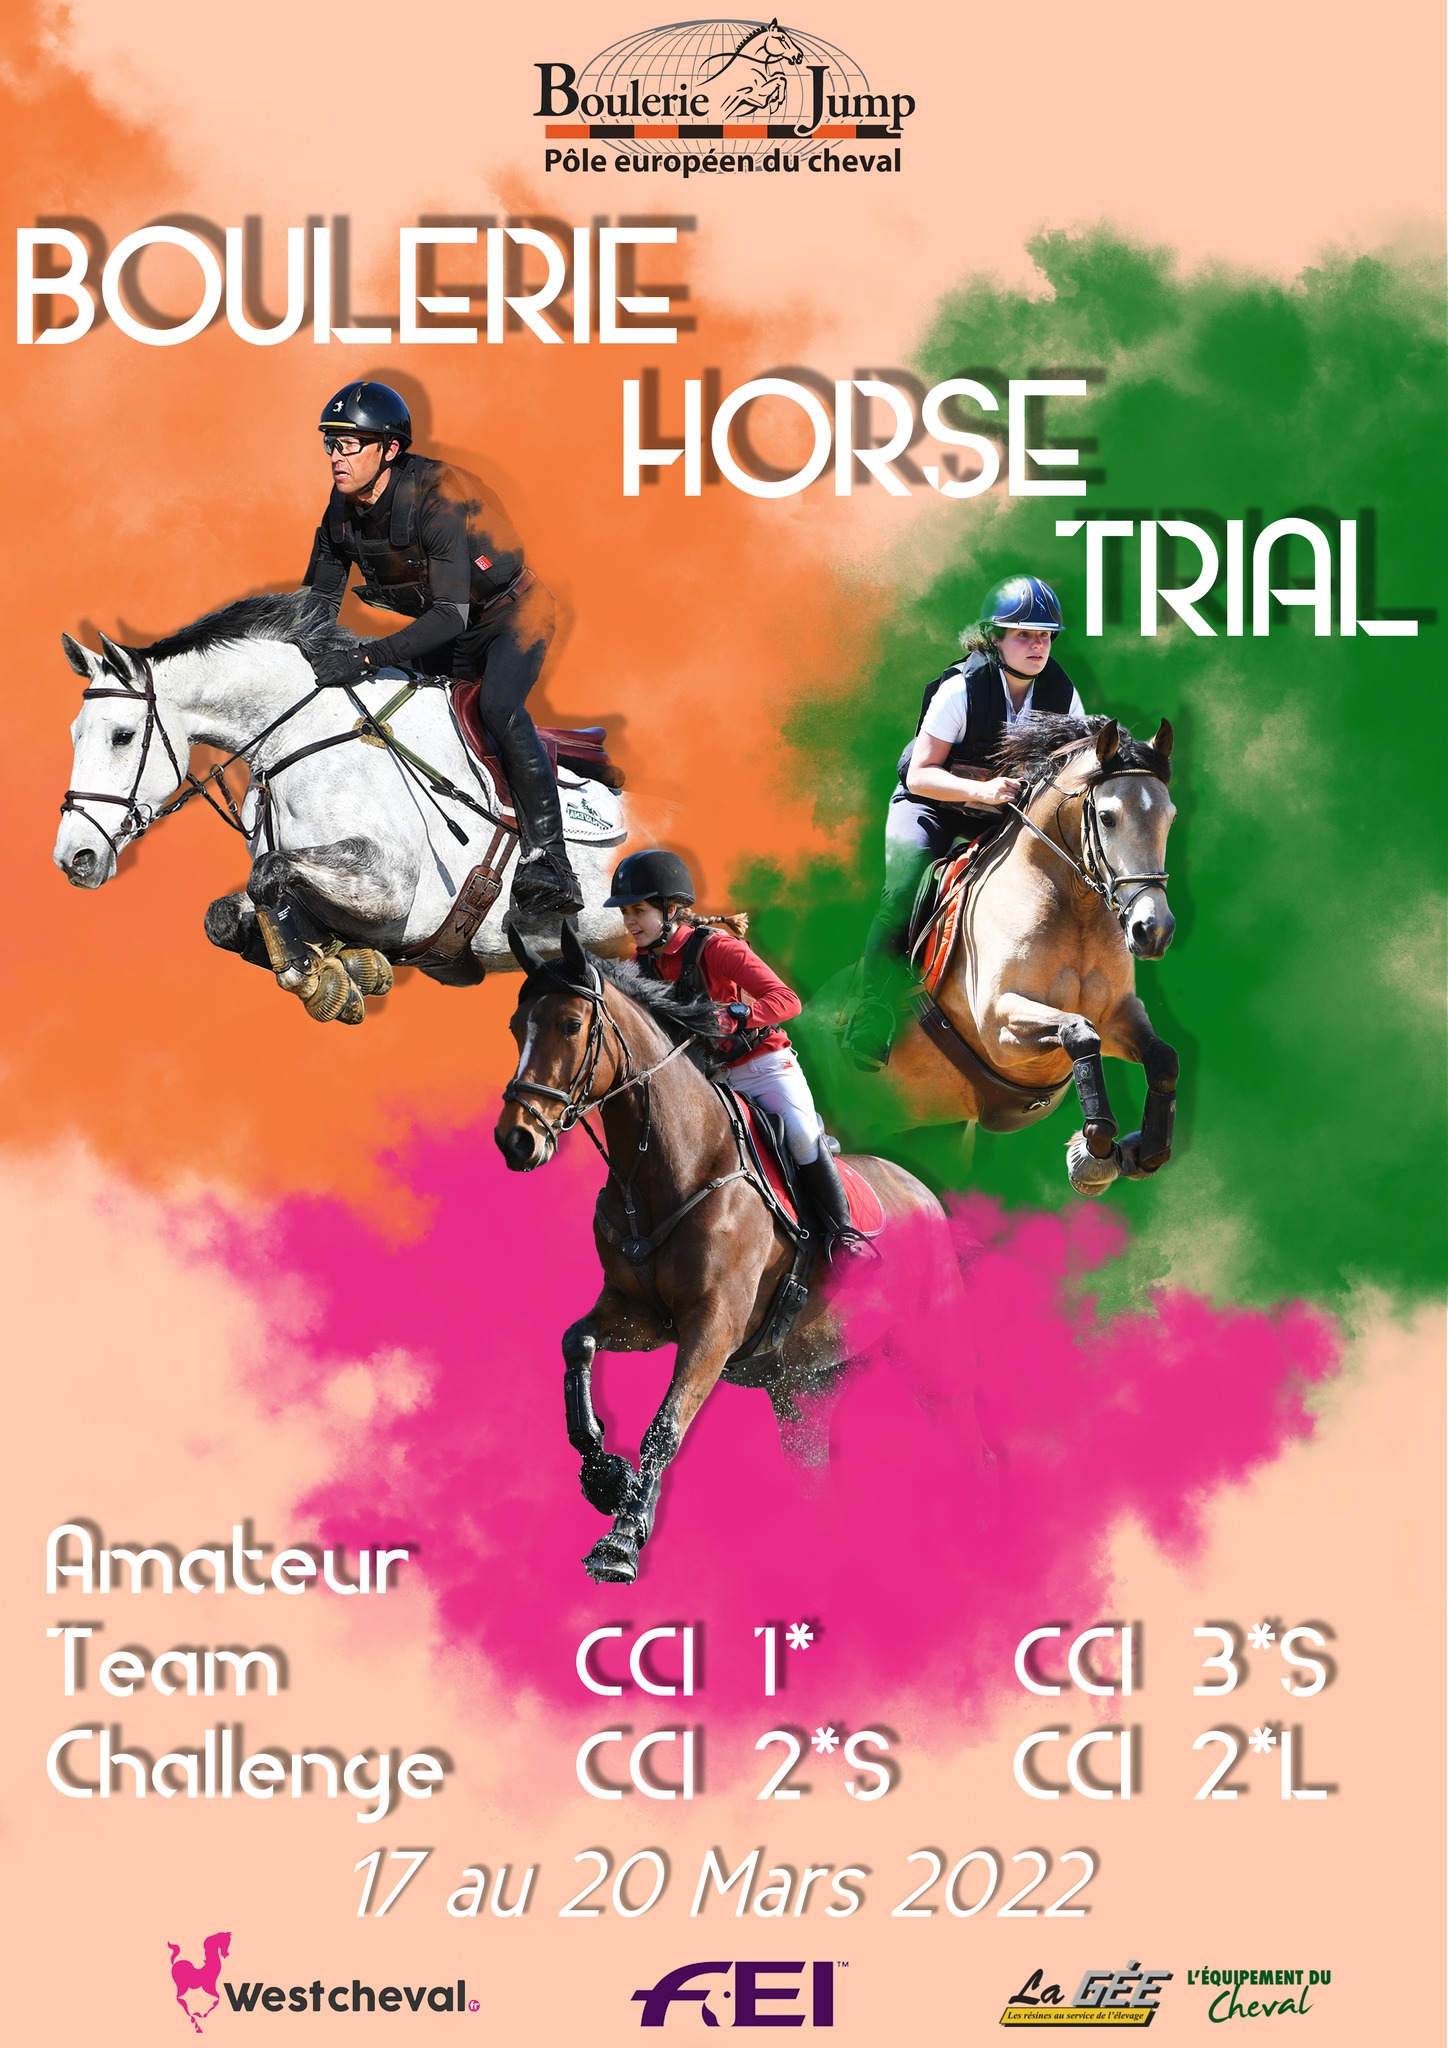 <REPLAY> CONCOURS COMPLET INTERNATIONAL - POLE EUROPEEN DU CHEVAL - BOULERIES JUMP